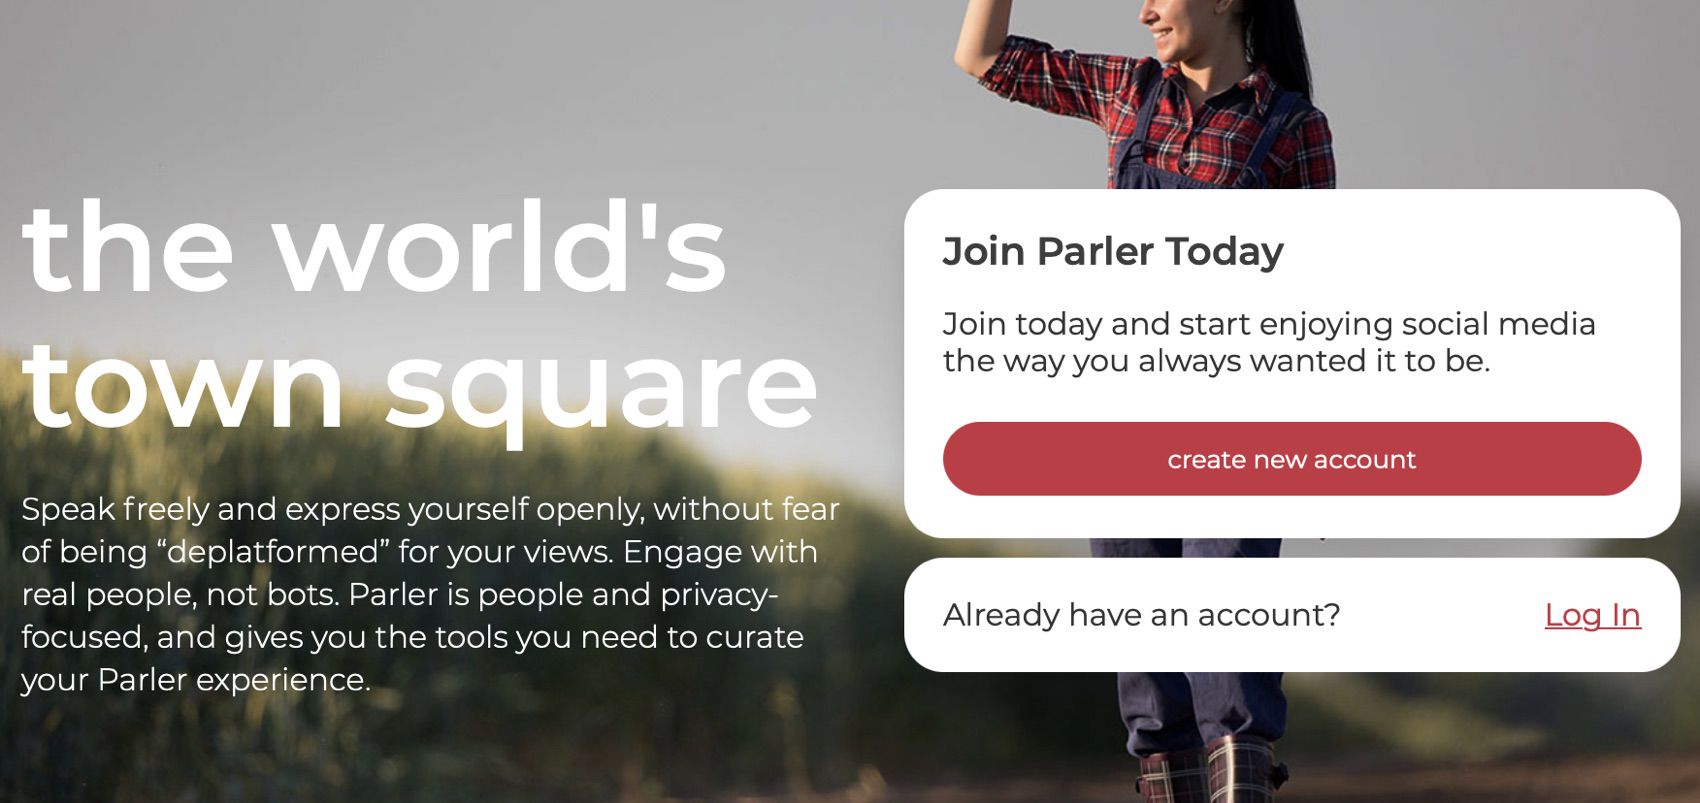 Apple threatens to ban Parler from the App Store while Twitter bans Donald Trump